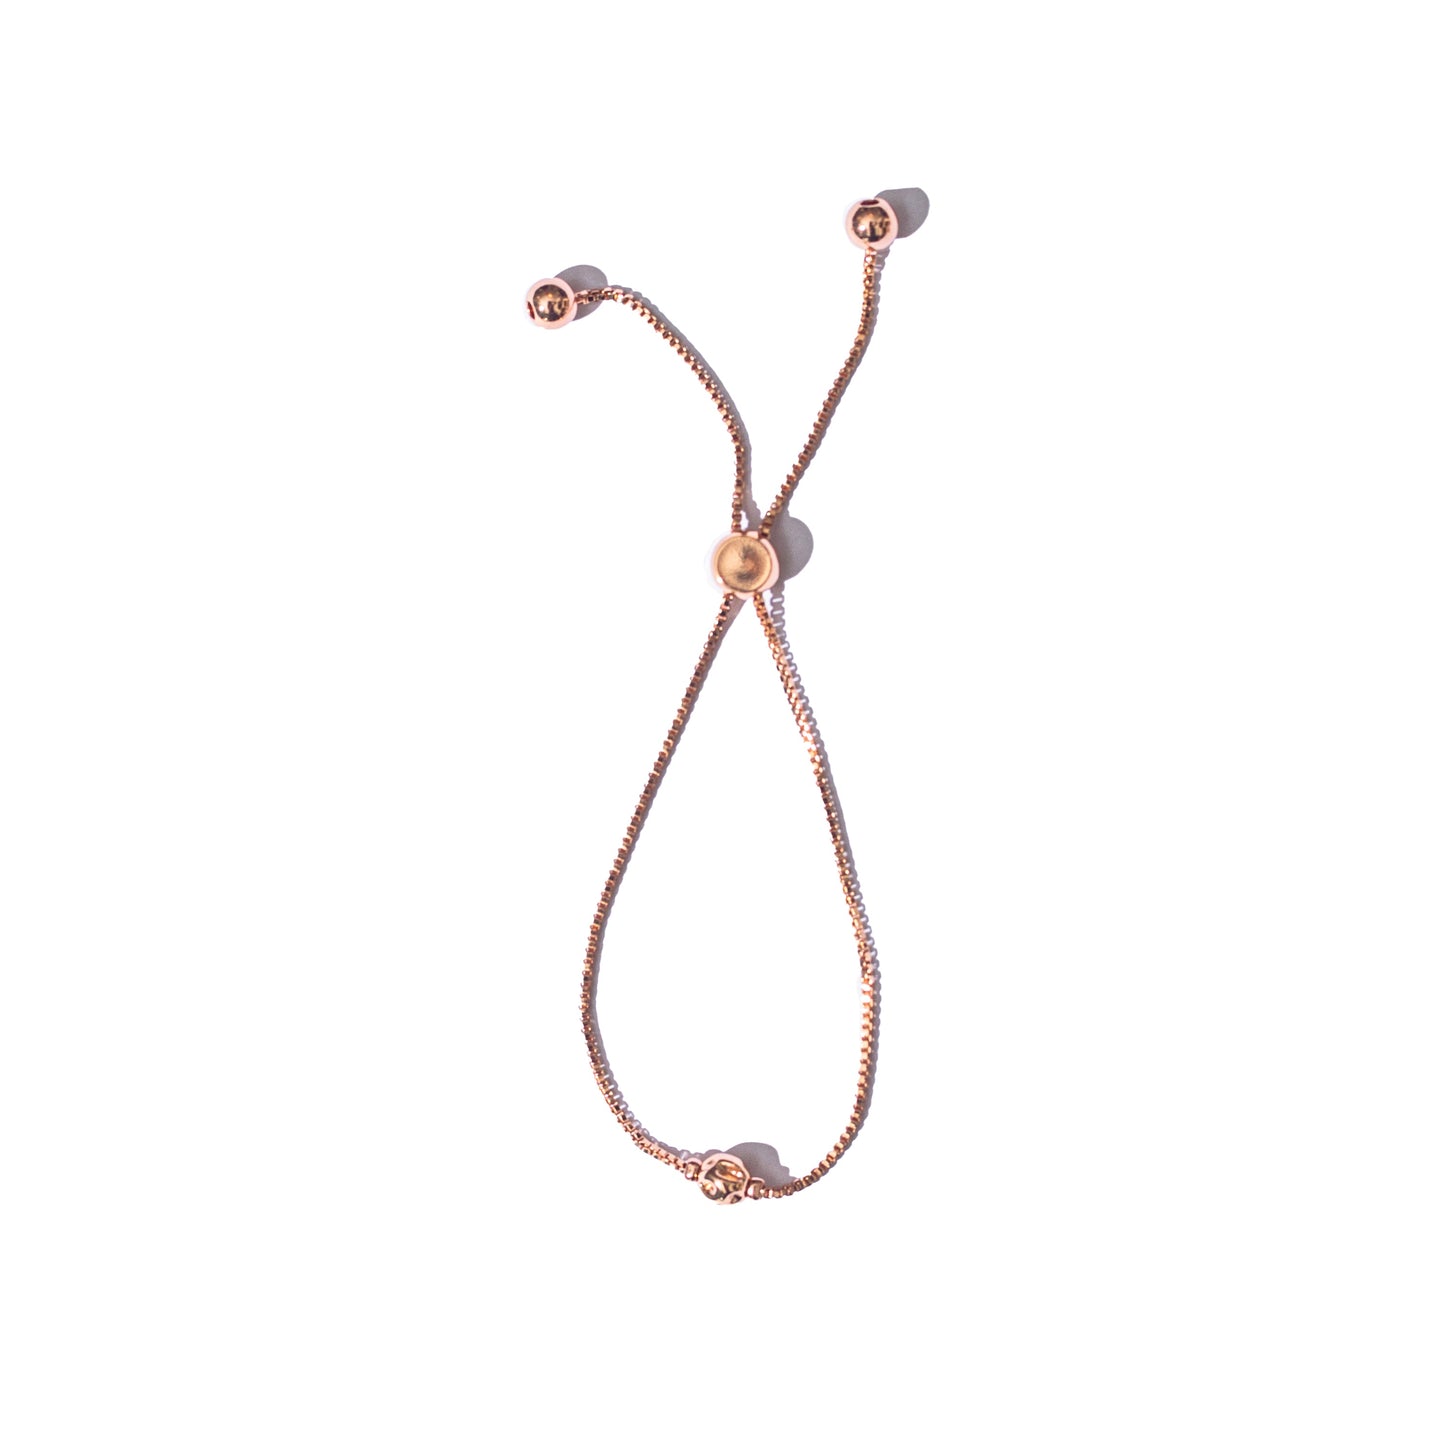 BRACELET WITH CRUSHED JUGGLING BALL (ROSE GOLD)